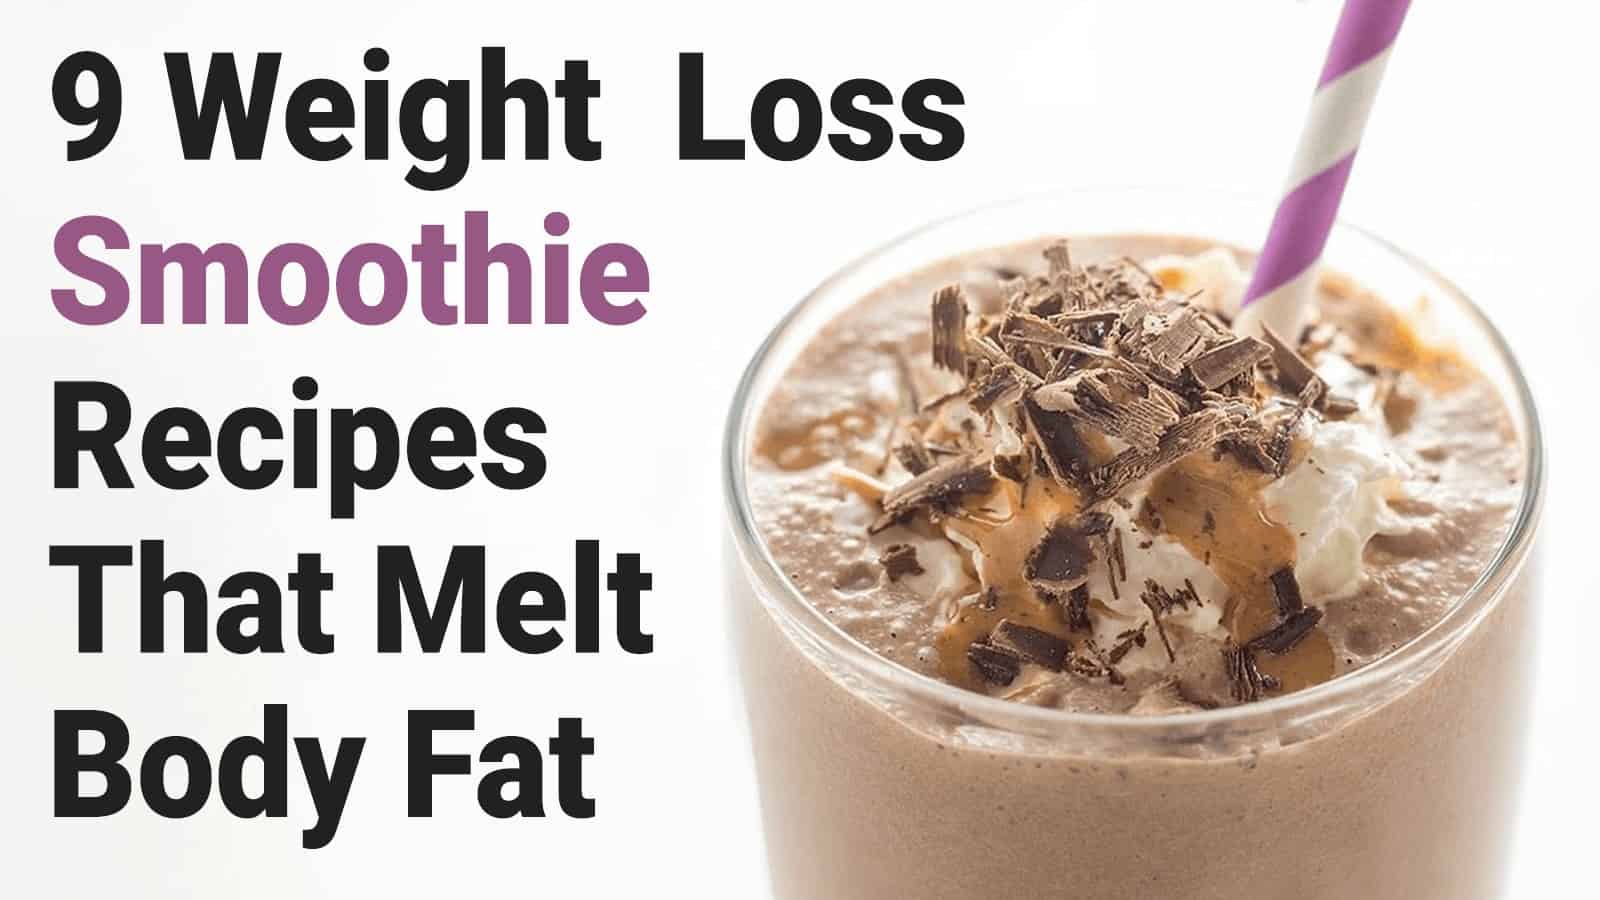 9 Weight Loss Smoothie Recipes That Melt Body Fat